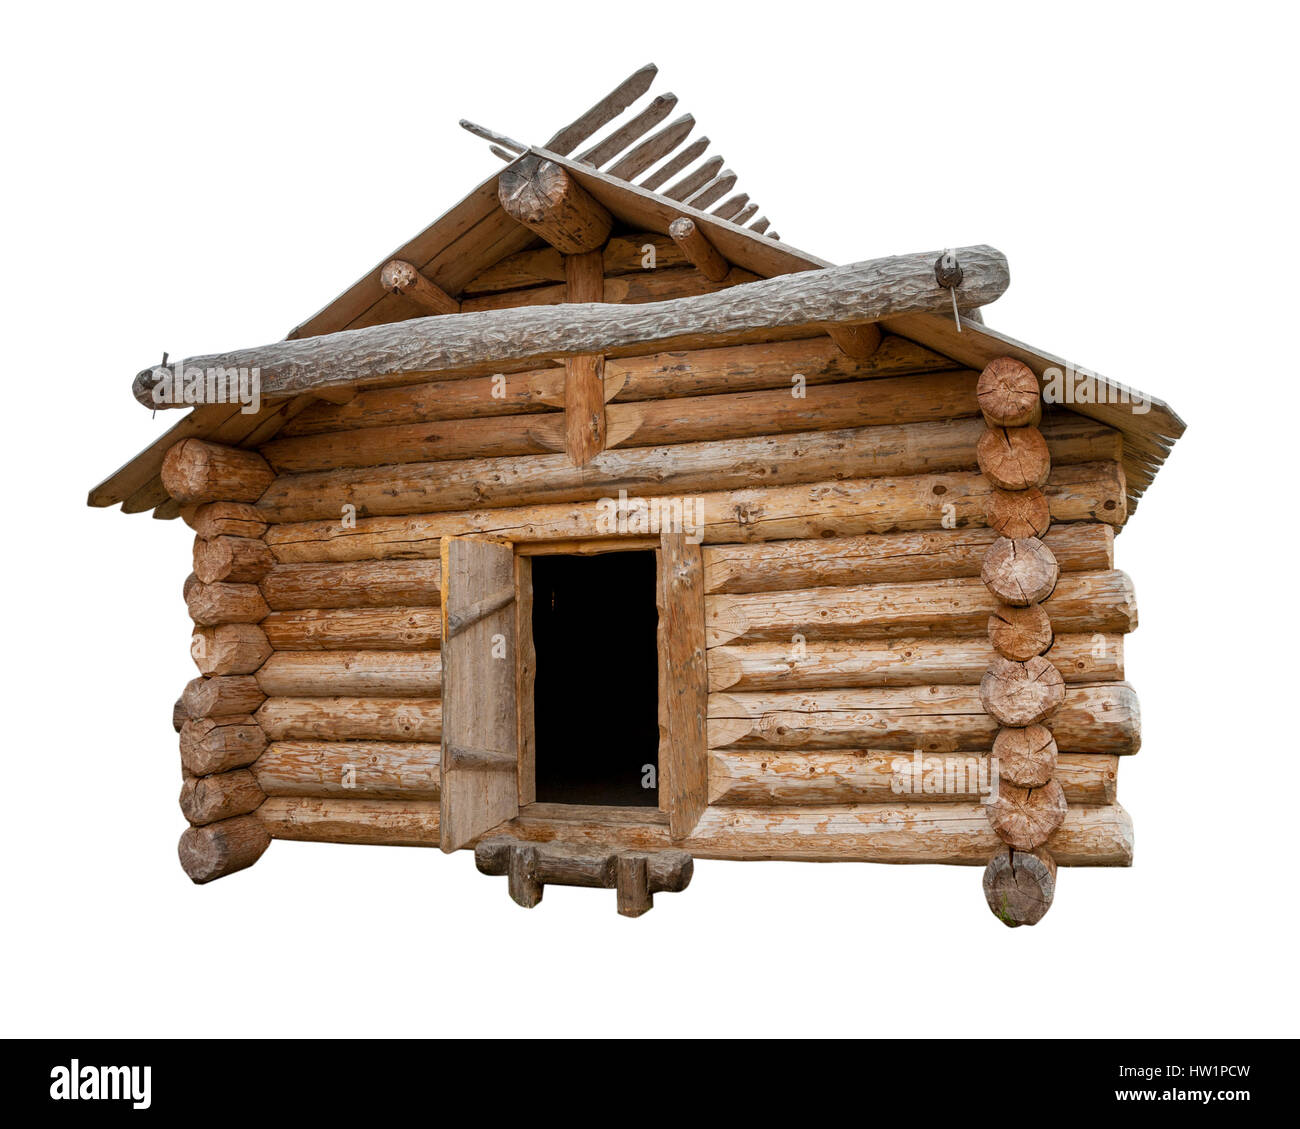 Wooden log cabin, isolated on white background Stock Photo